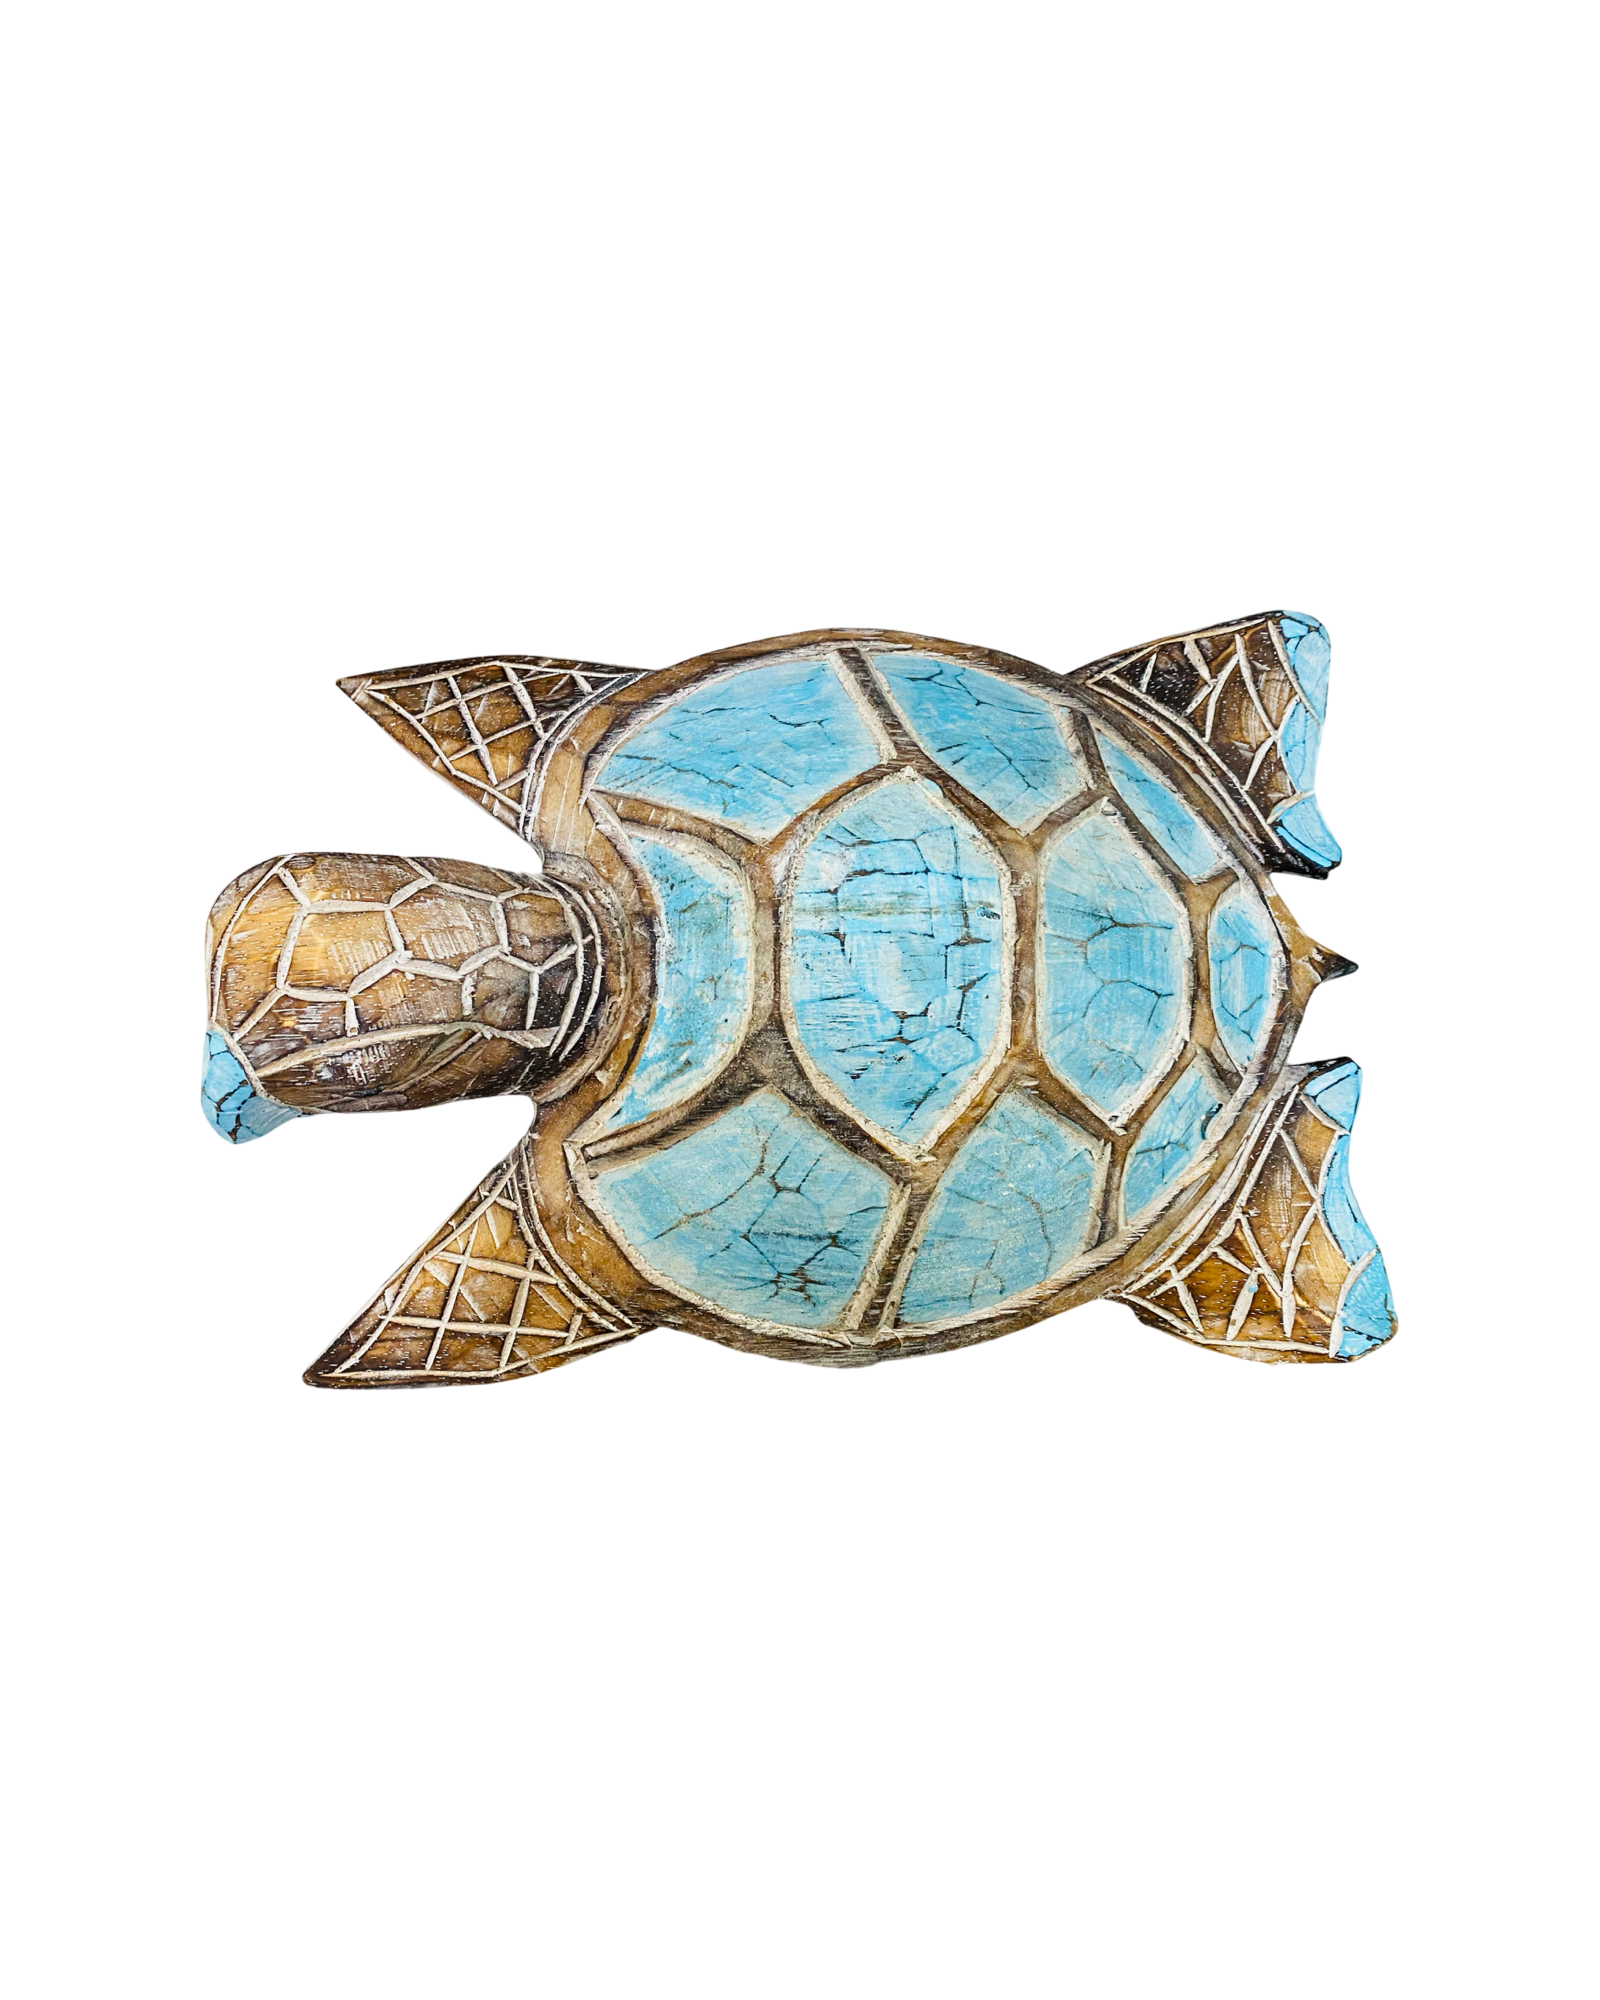 Wooden carved turtles in a set of three in brown with blue detailing. 